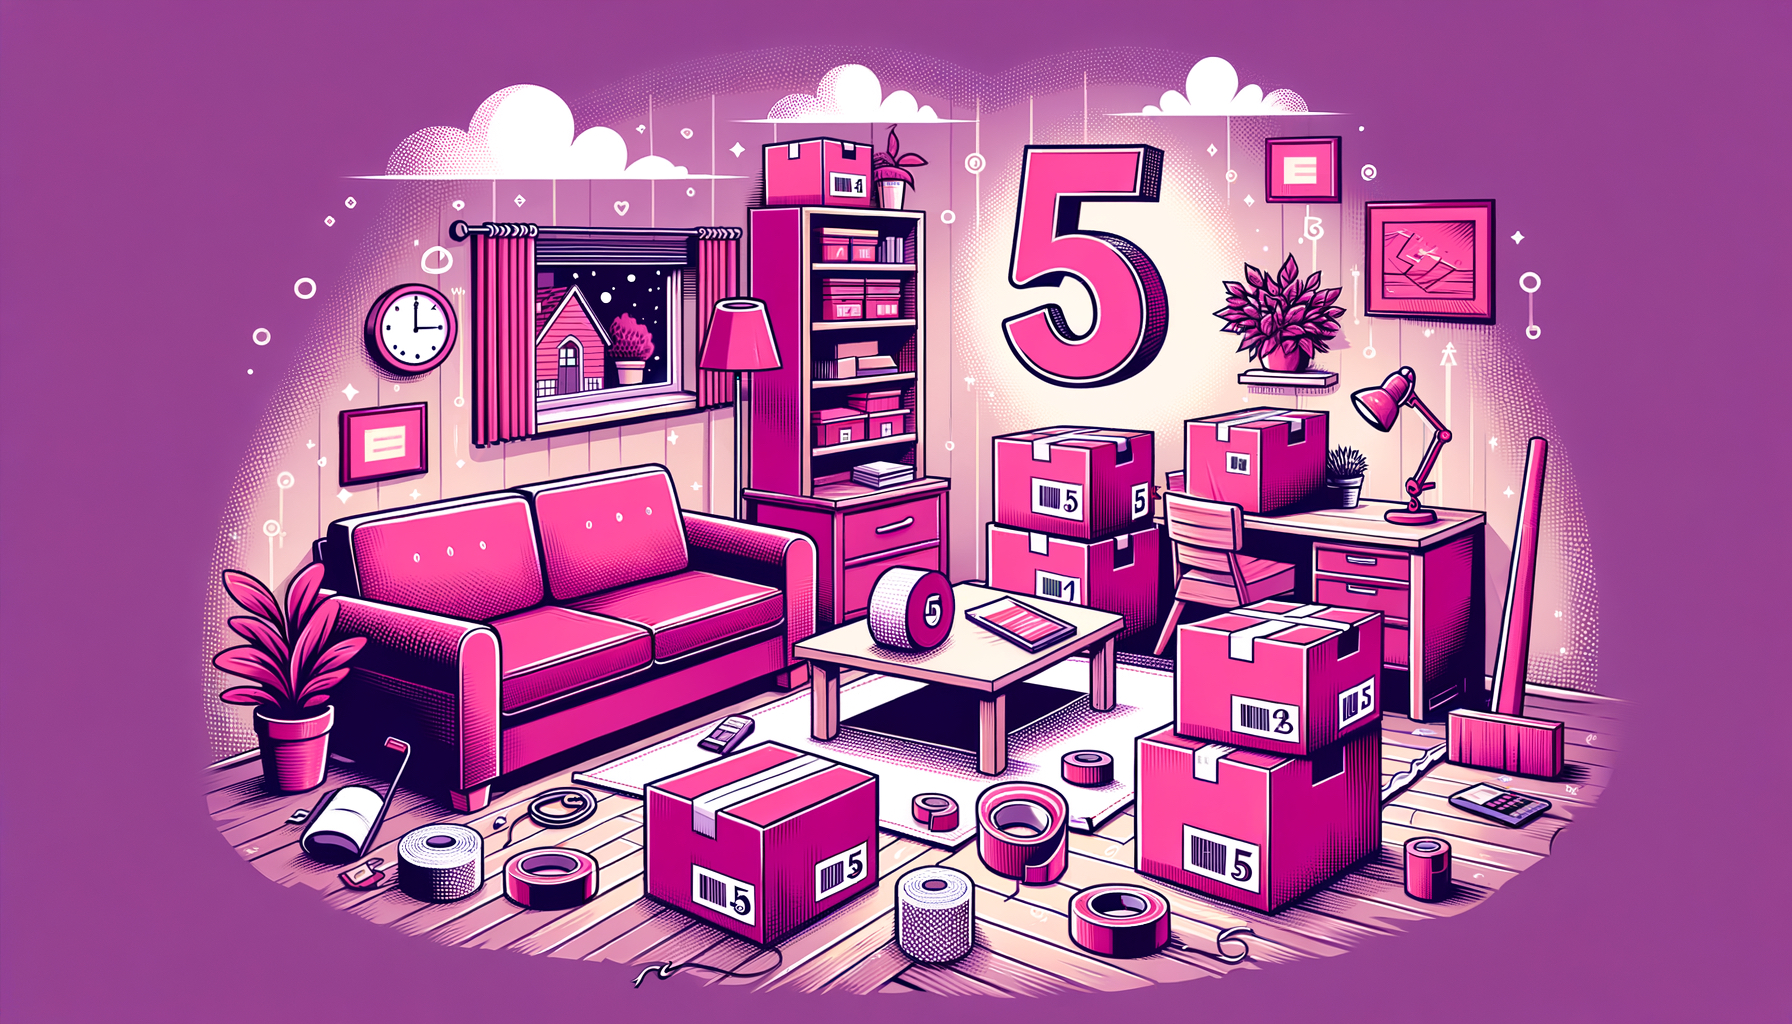 Cartoon illustration of fuschia colored packing boxes with moving essentials for a stress-free move.